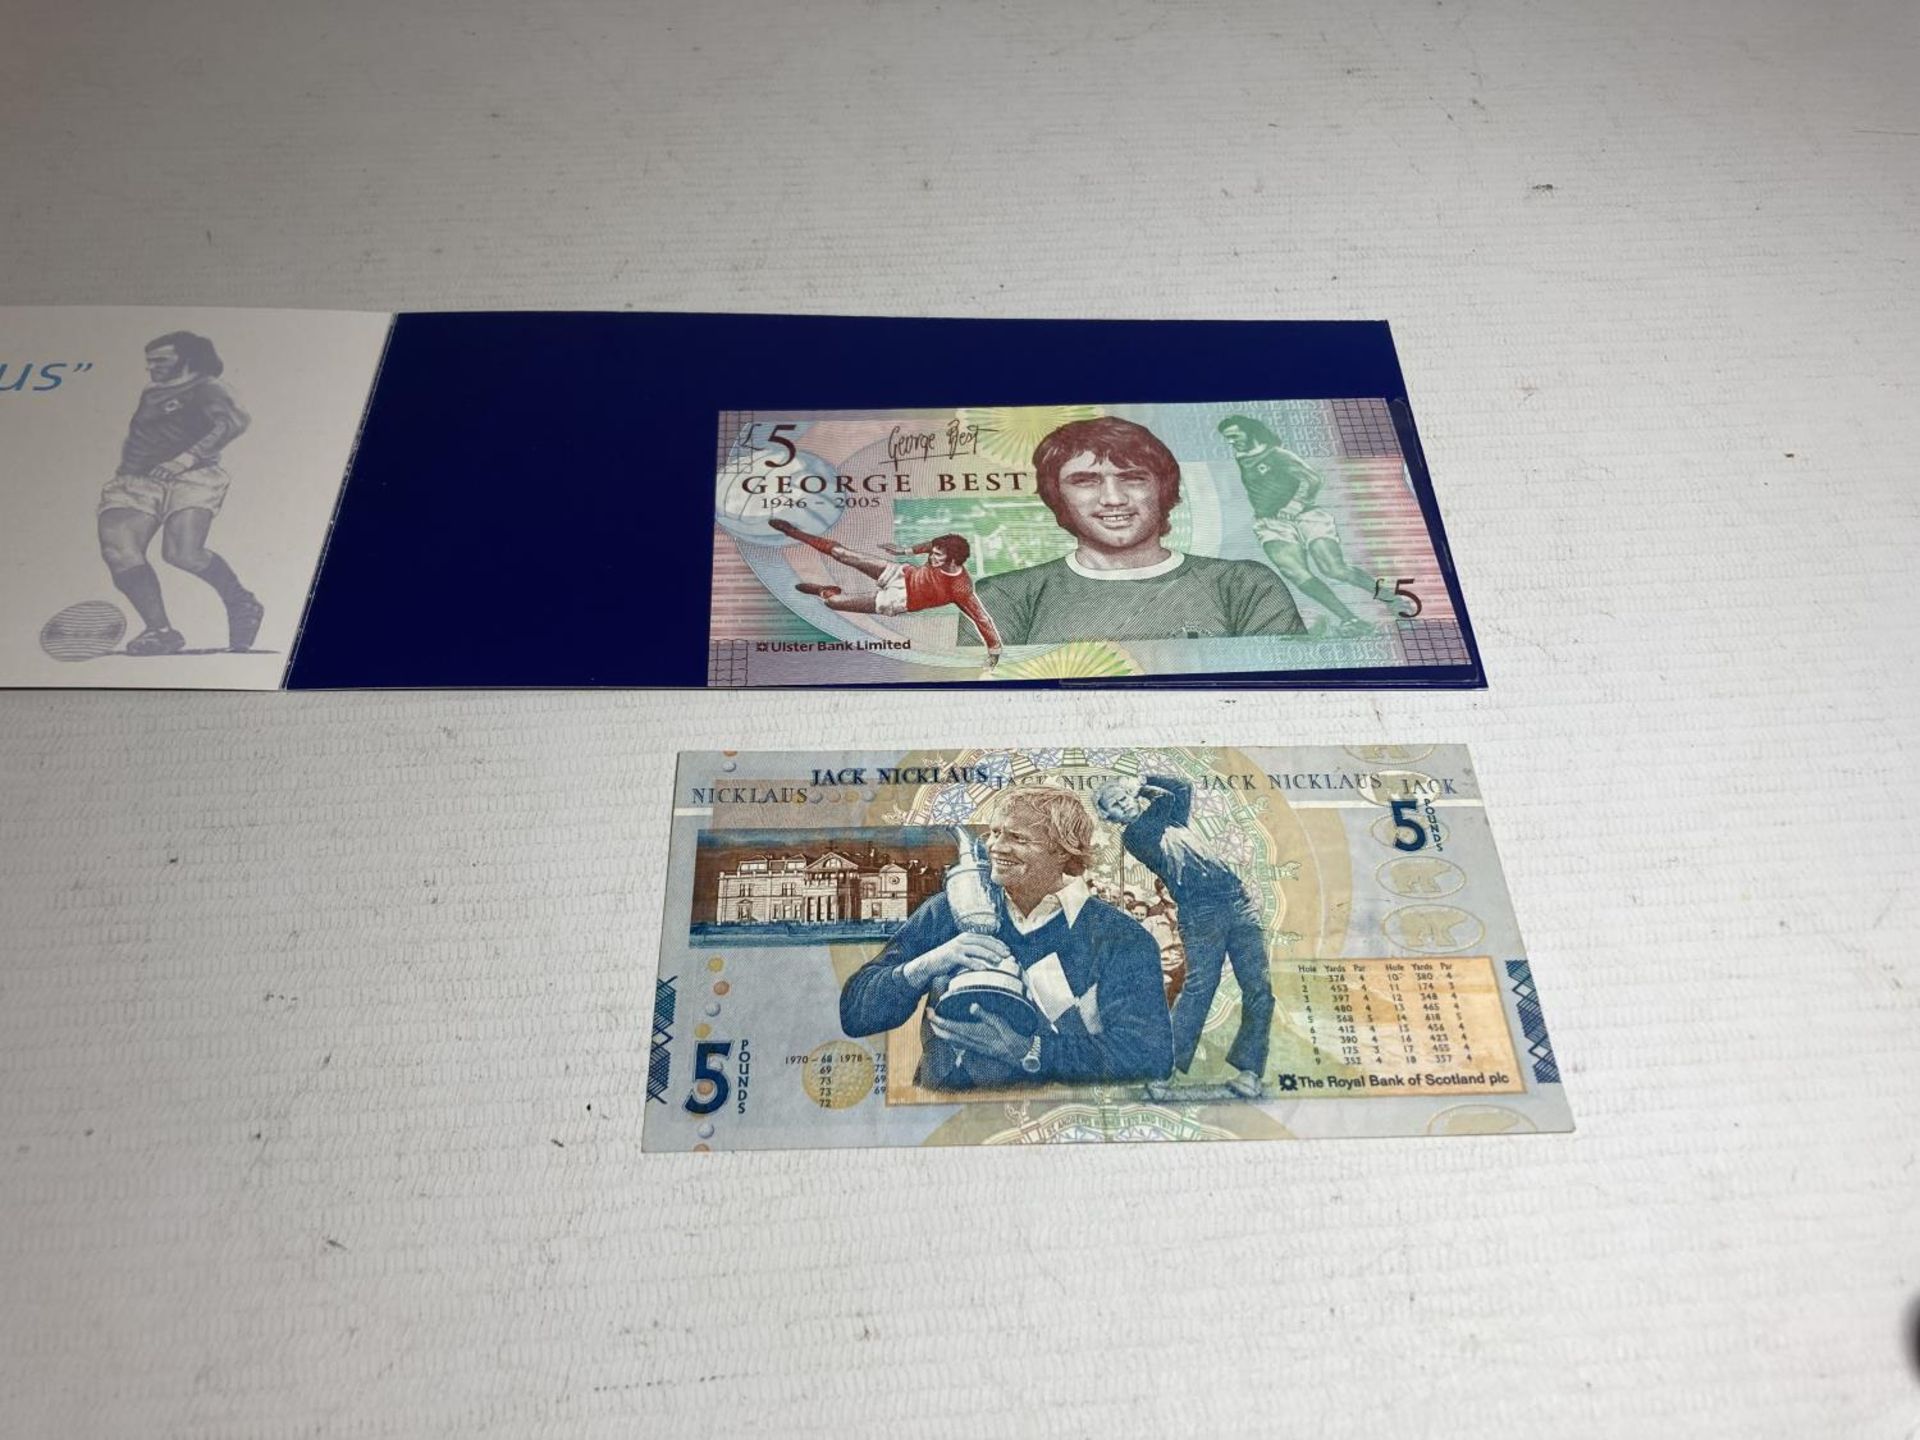 AN ULSTER BANK GEORGE BEST FIVE POUND NOTE IN A FOLDER AND A BANK OF SCOTLAND JACK NICKLAUS FIVE